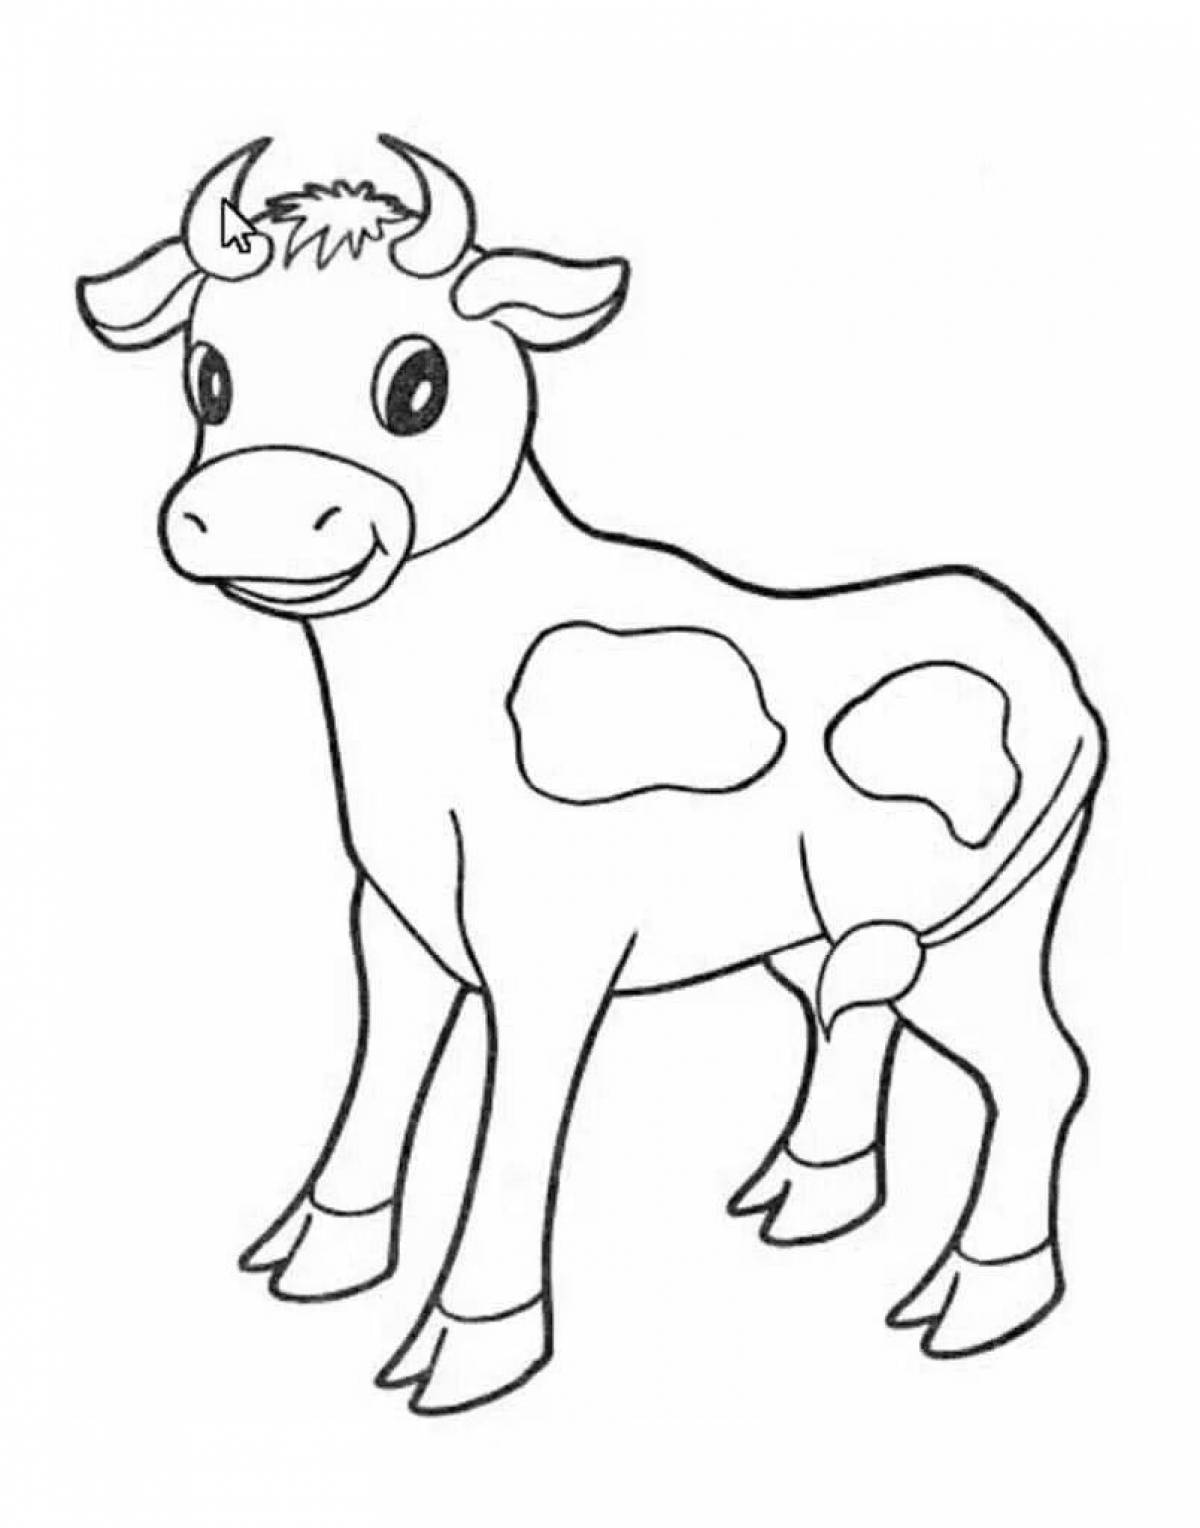 Live cow coloring book